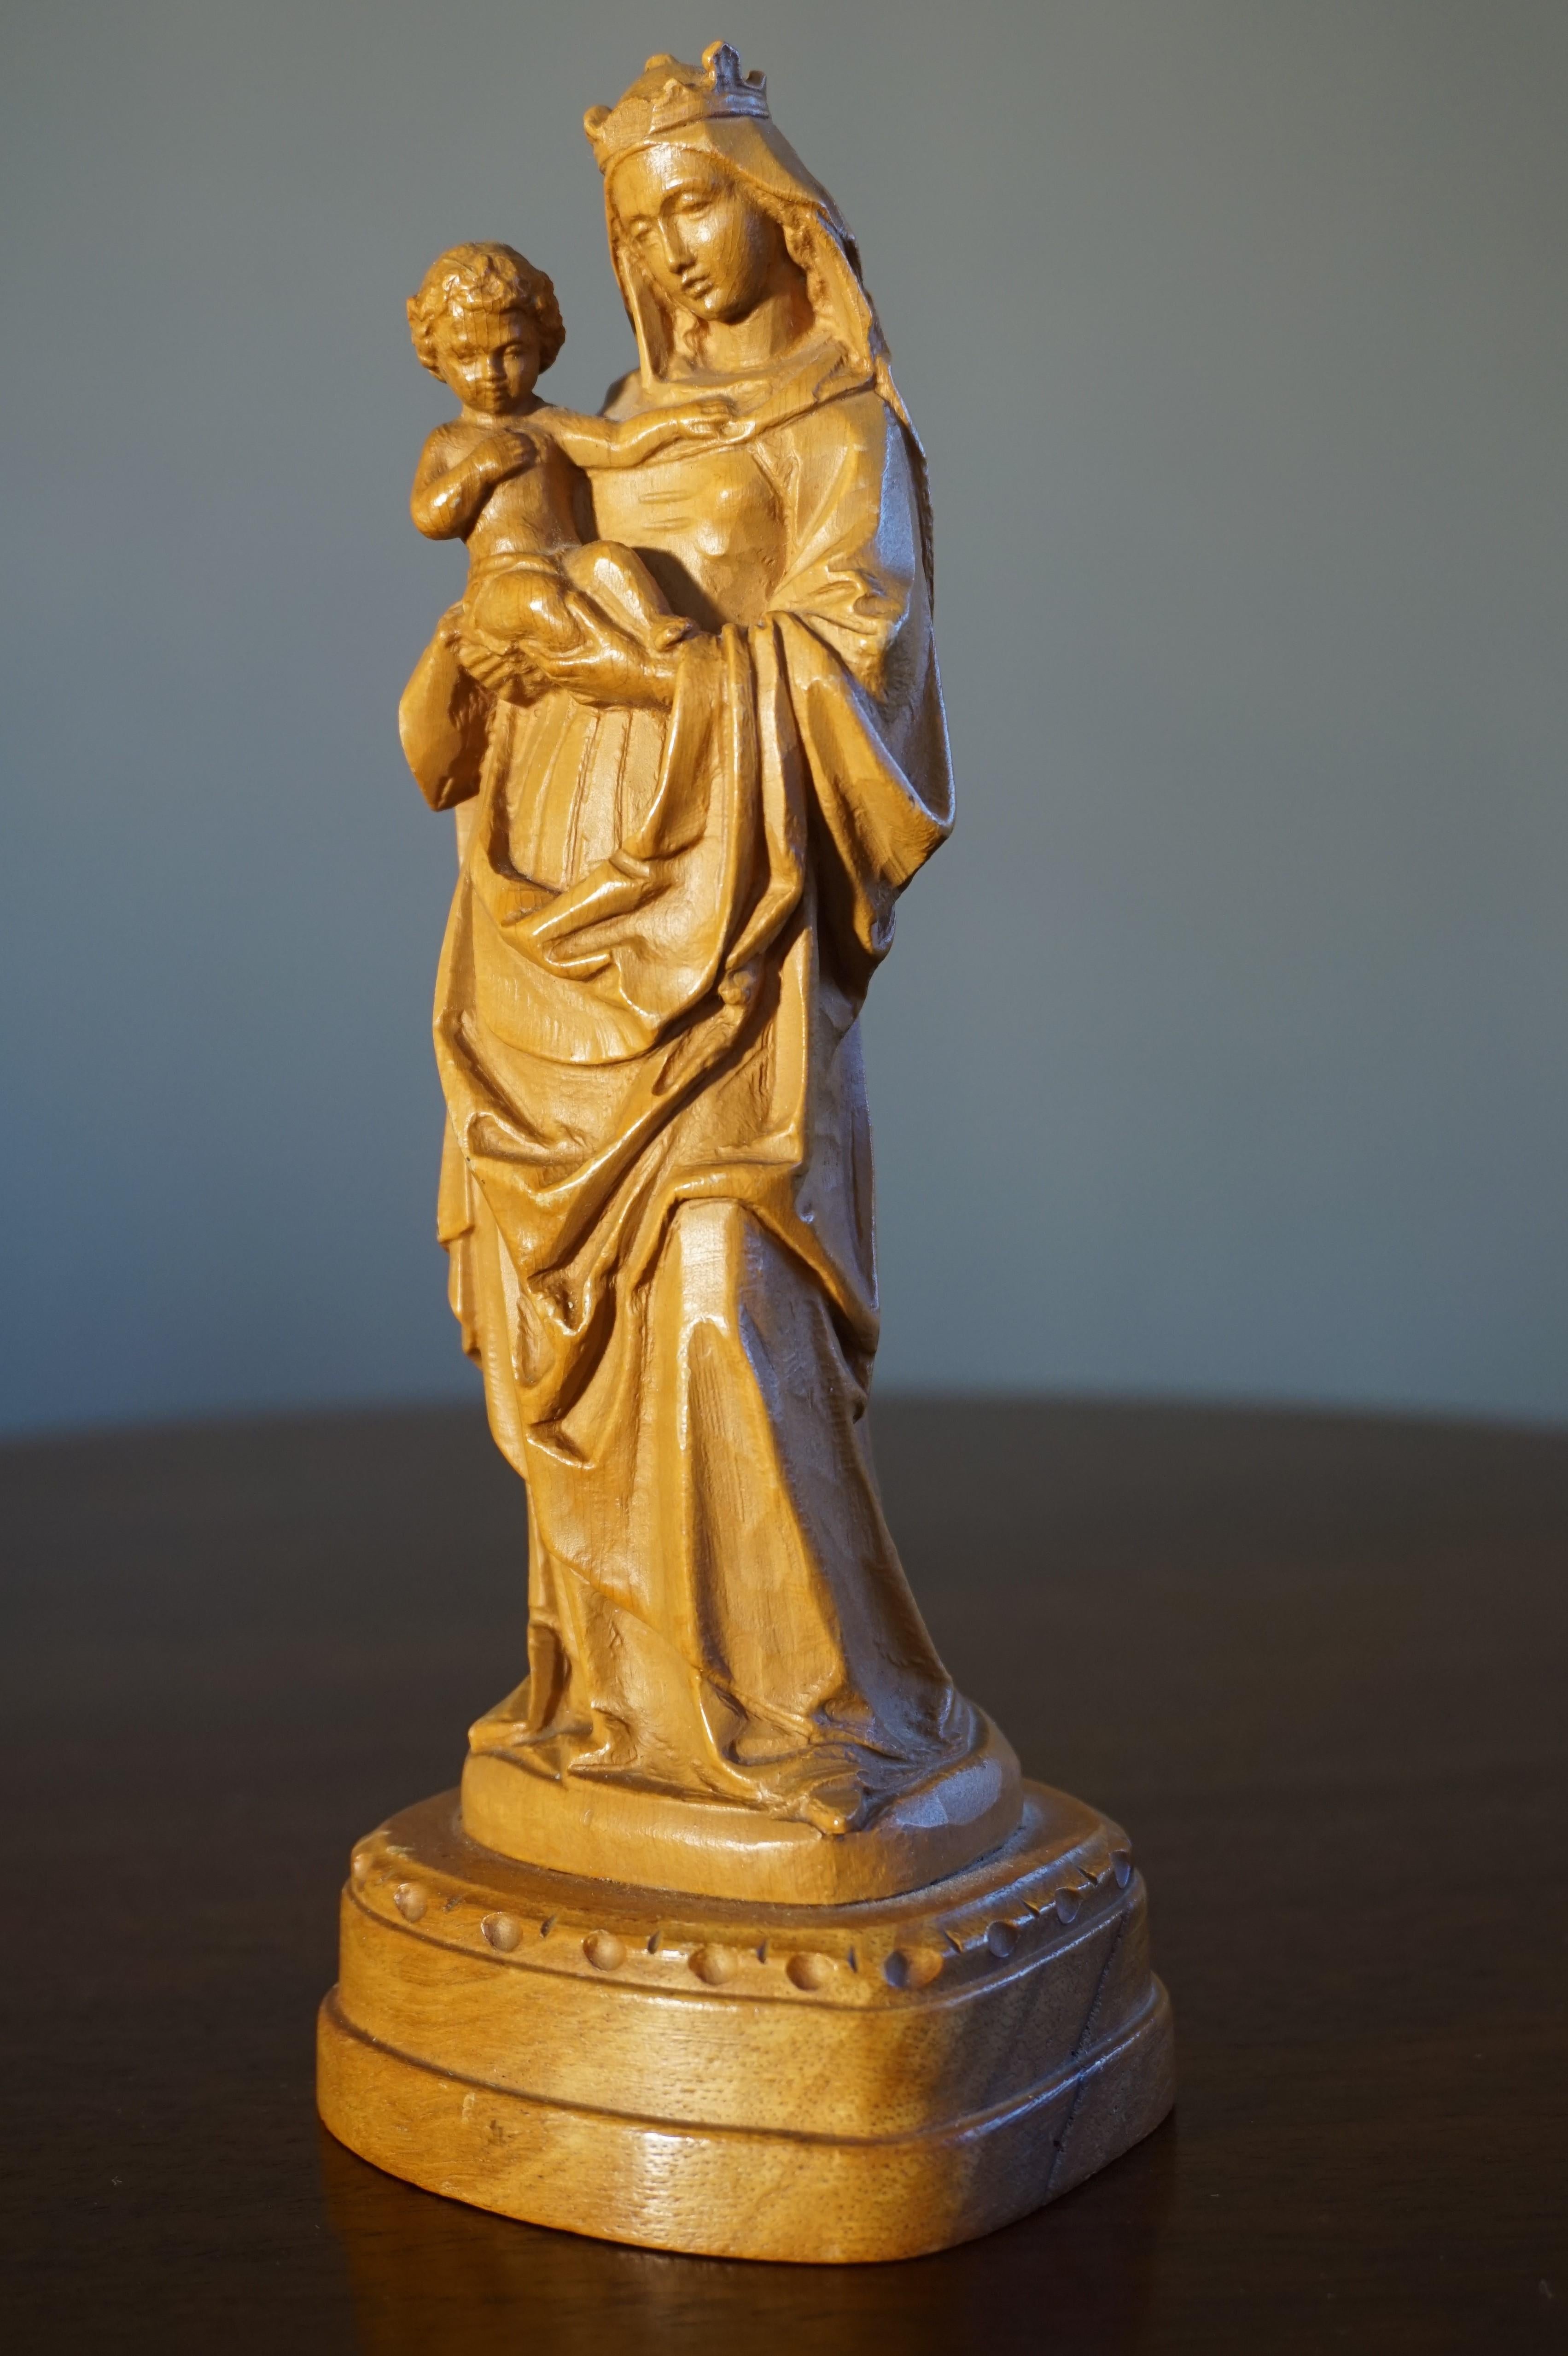 Finest Quality, Hand Carved Miniature Statue of Mother Mary Holding Child Jesus 1